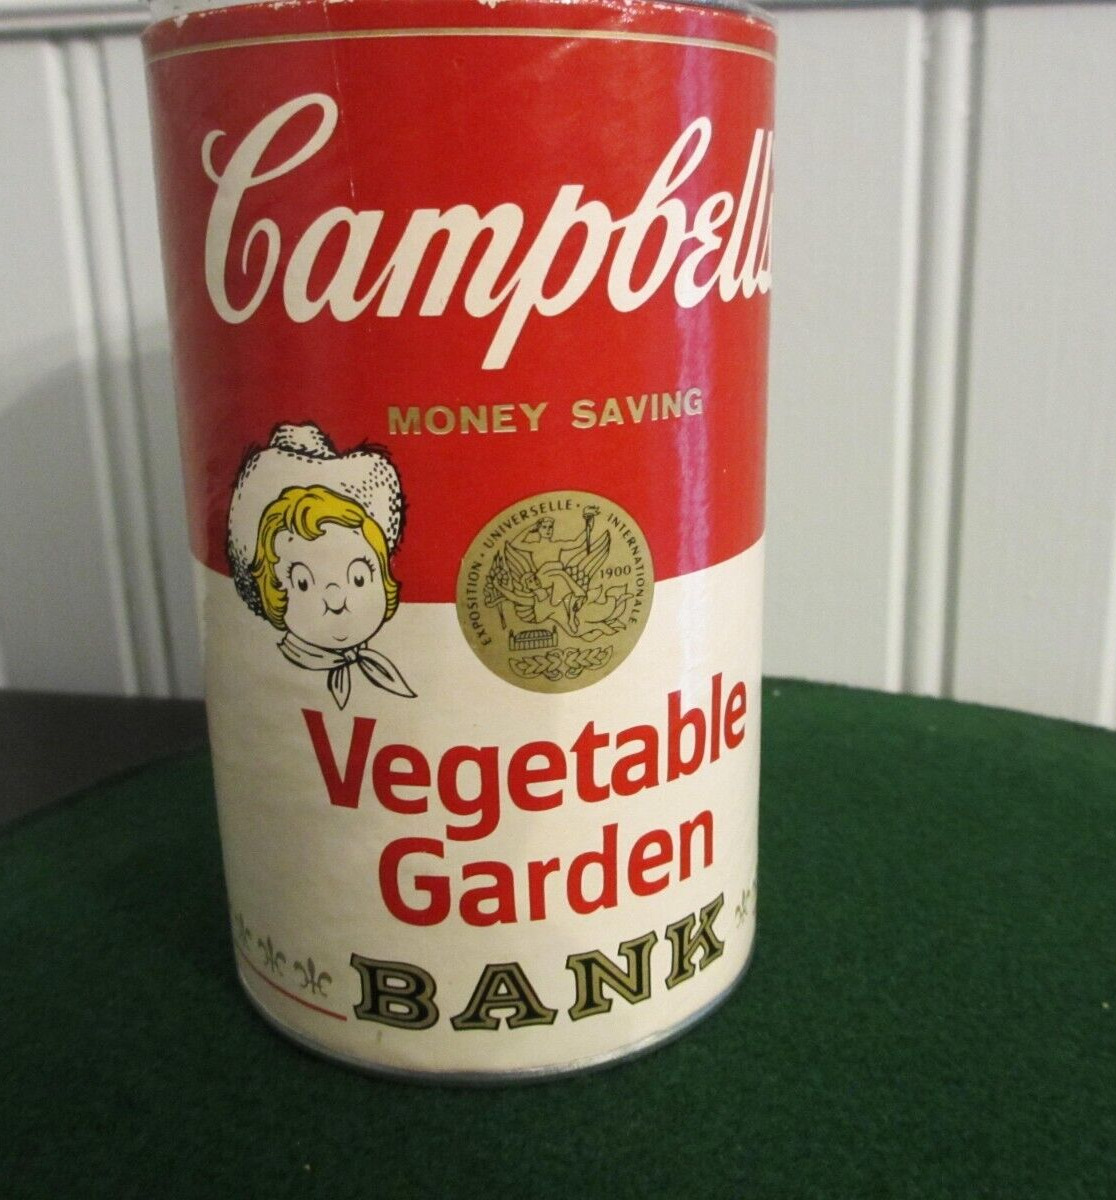 1977 Campbell's Vegetable Garden Bank with Seeds, Andy Warhol Design, Cardboard